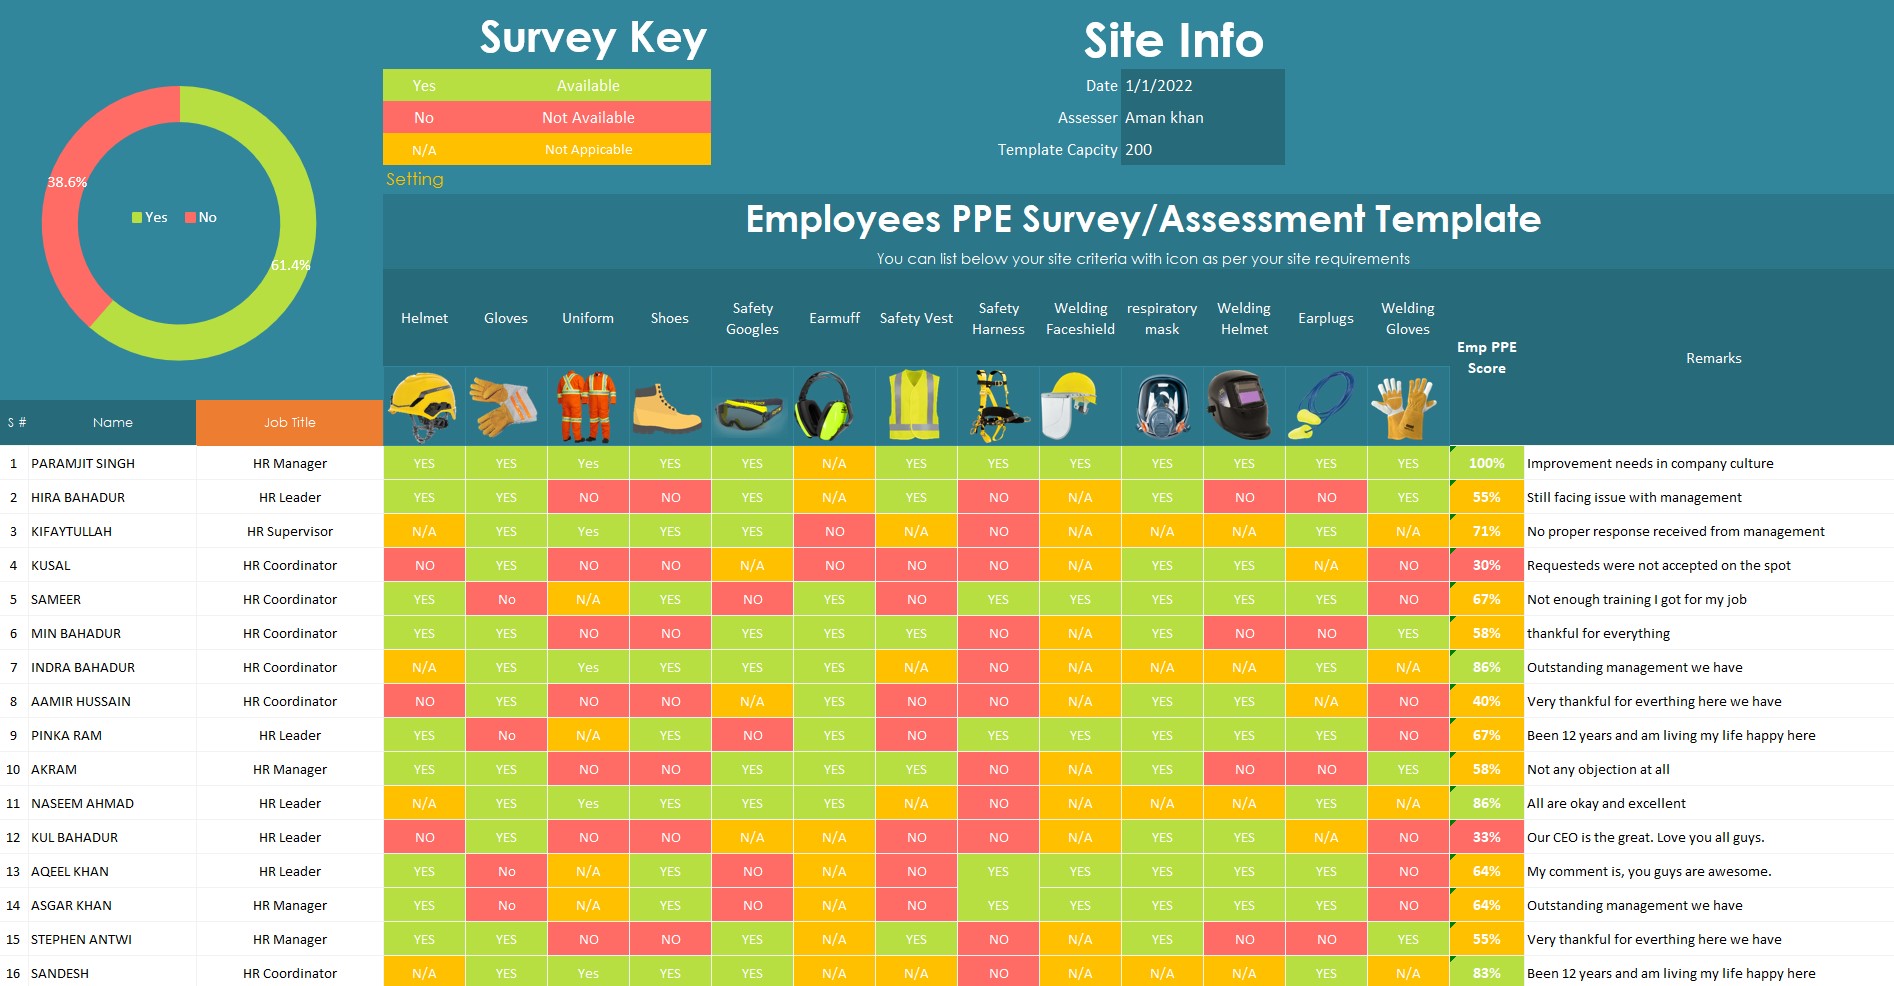 Employees PPE Survey & Assessment Template